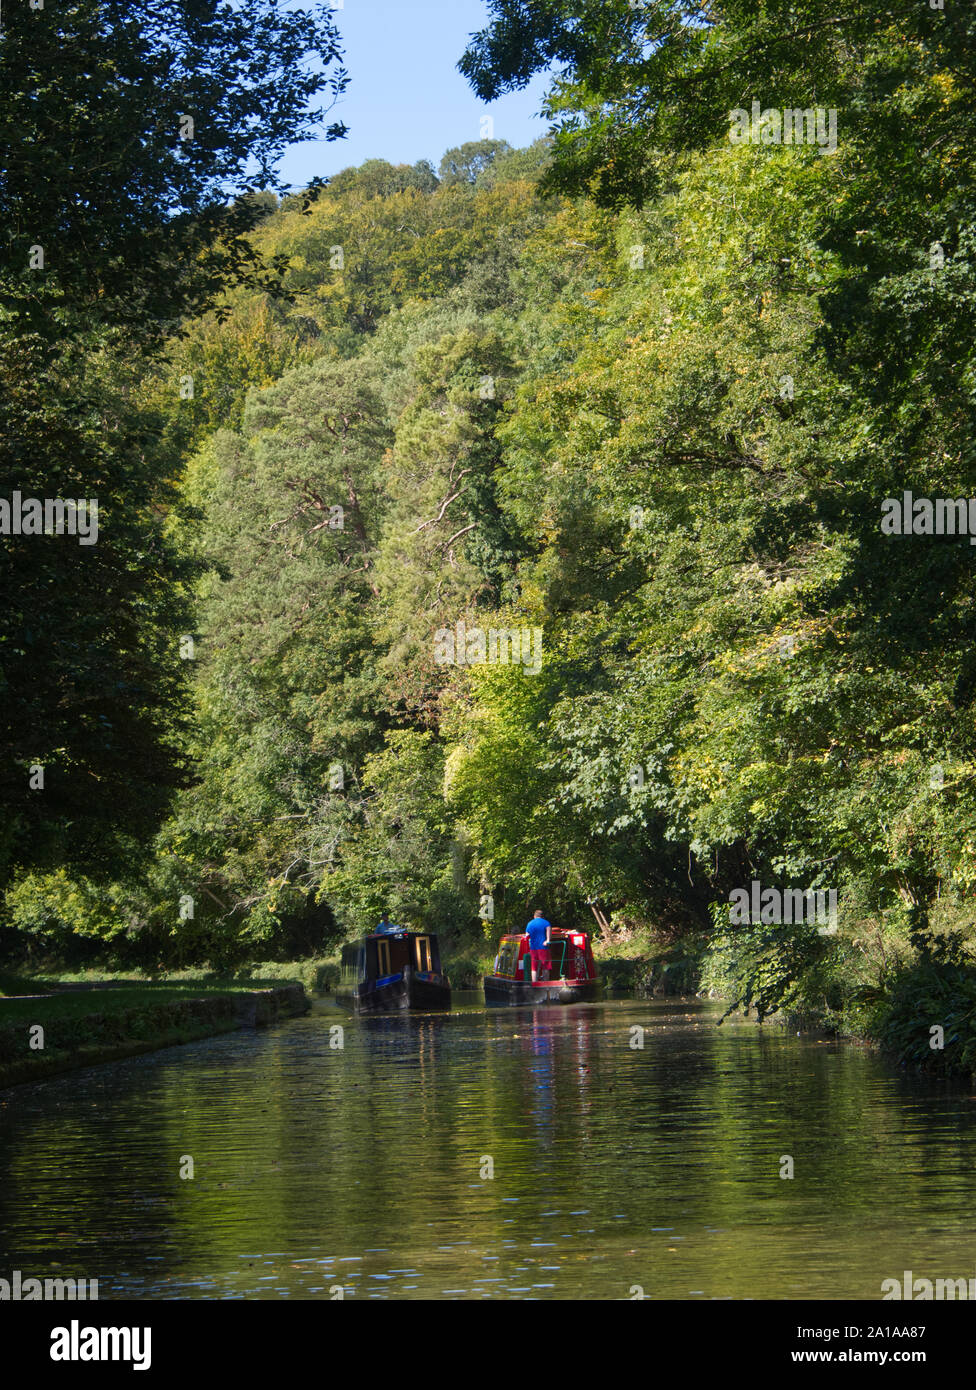 Canal boating holiday on Kennet and Avon canal from Bath boatyard Stock Photo